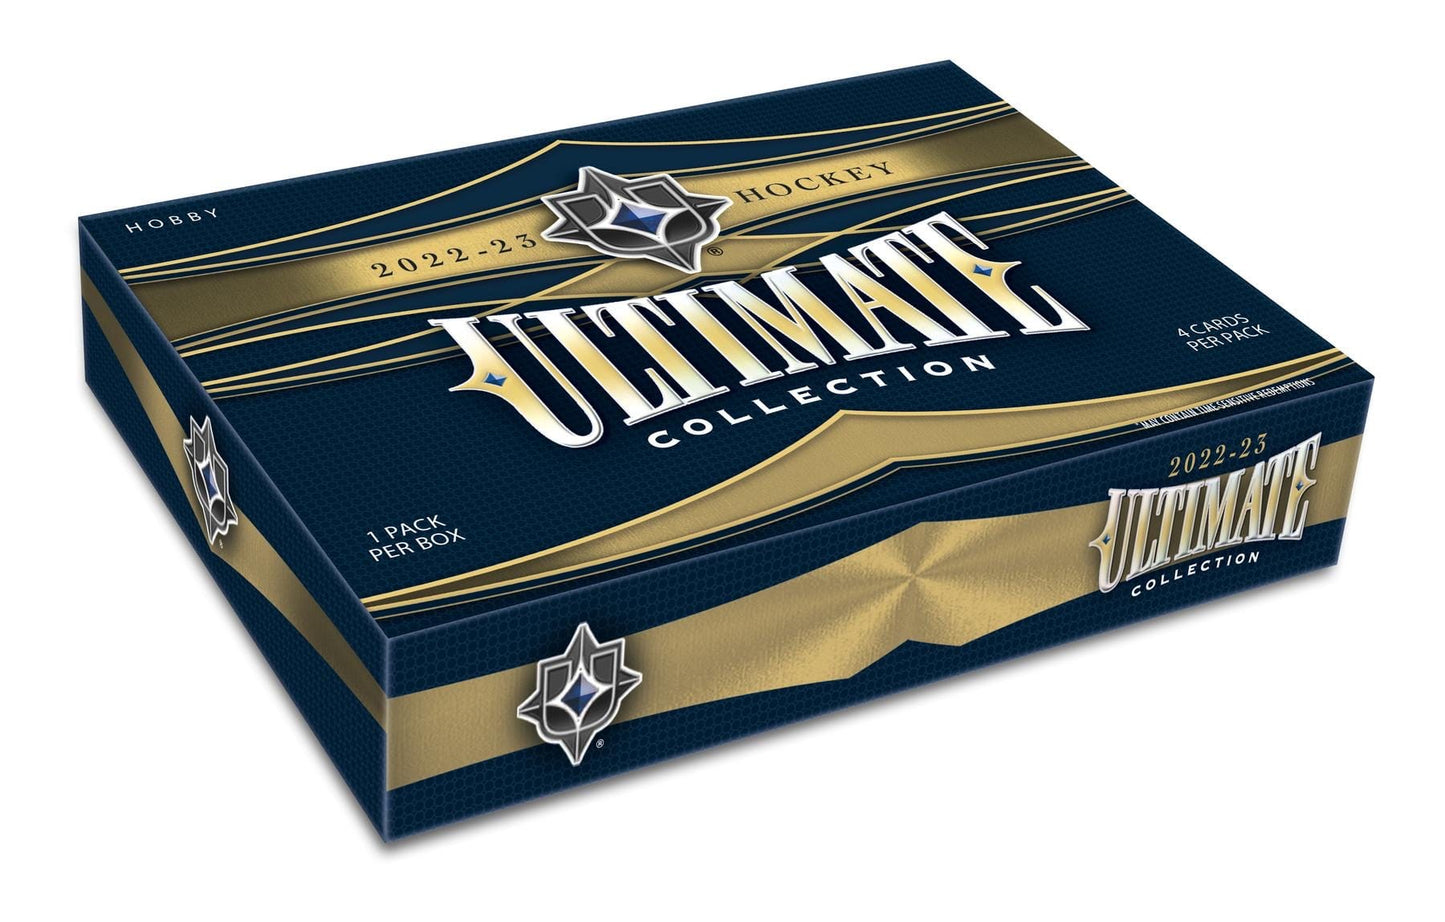 2022-23 Upper Deck Ultimate Hockey Collection, Hobby Box